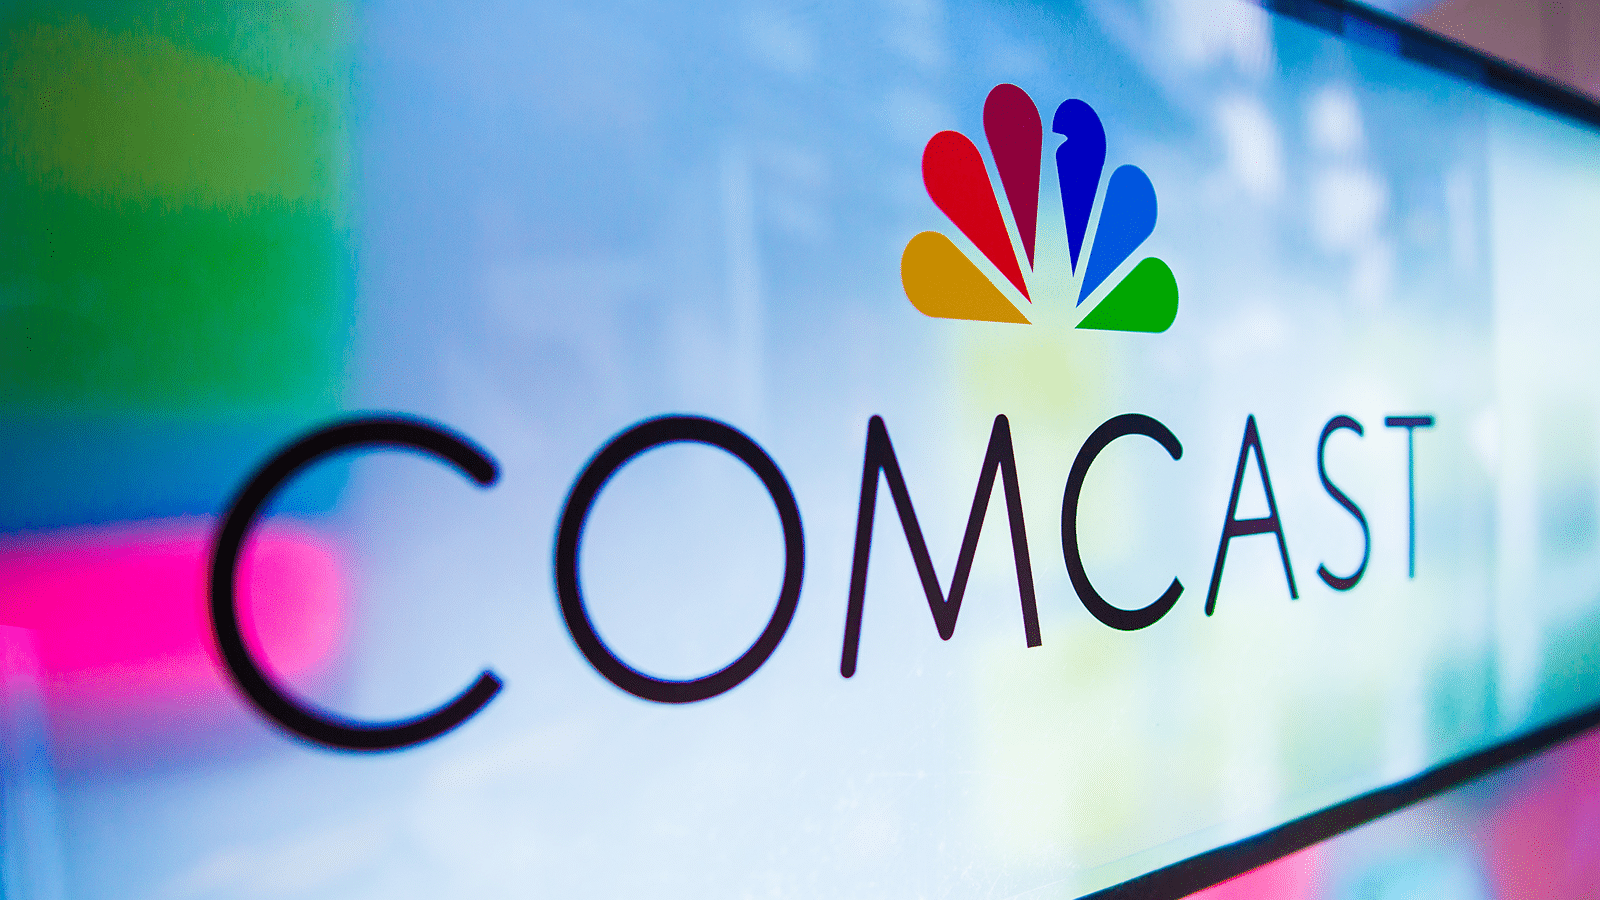 Comcast Pledges $100 Million to Fight ‘Injustice and Inequality’